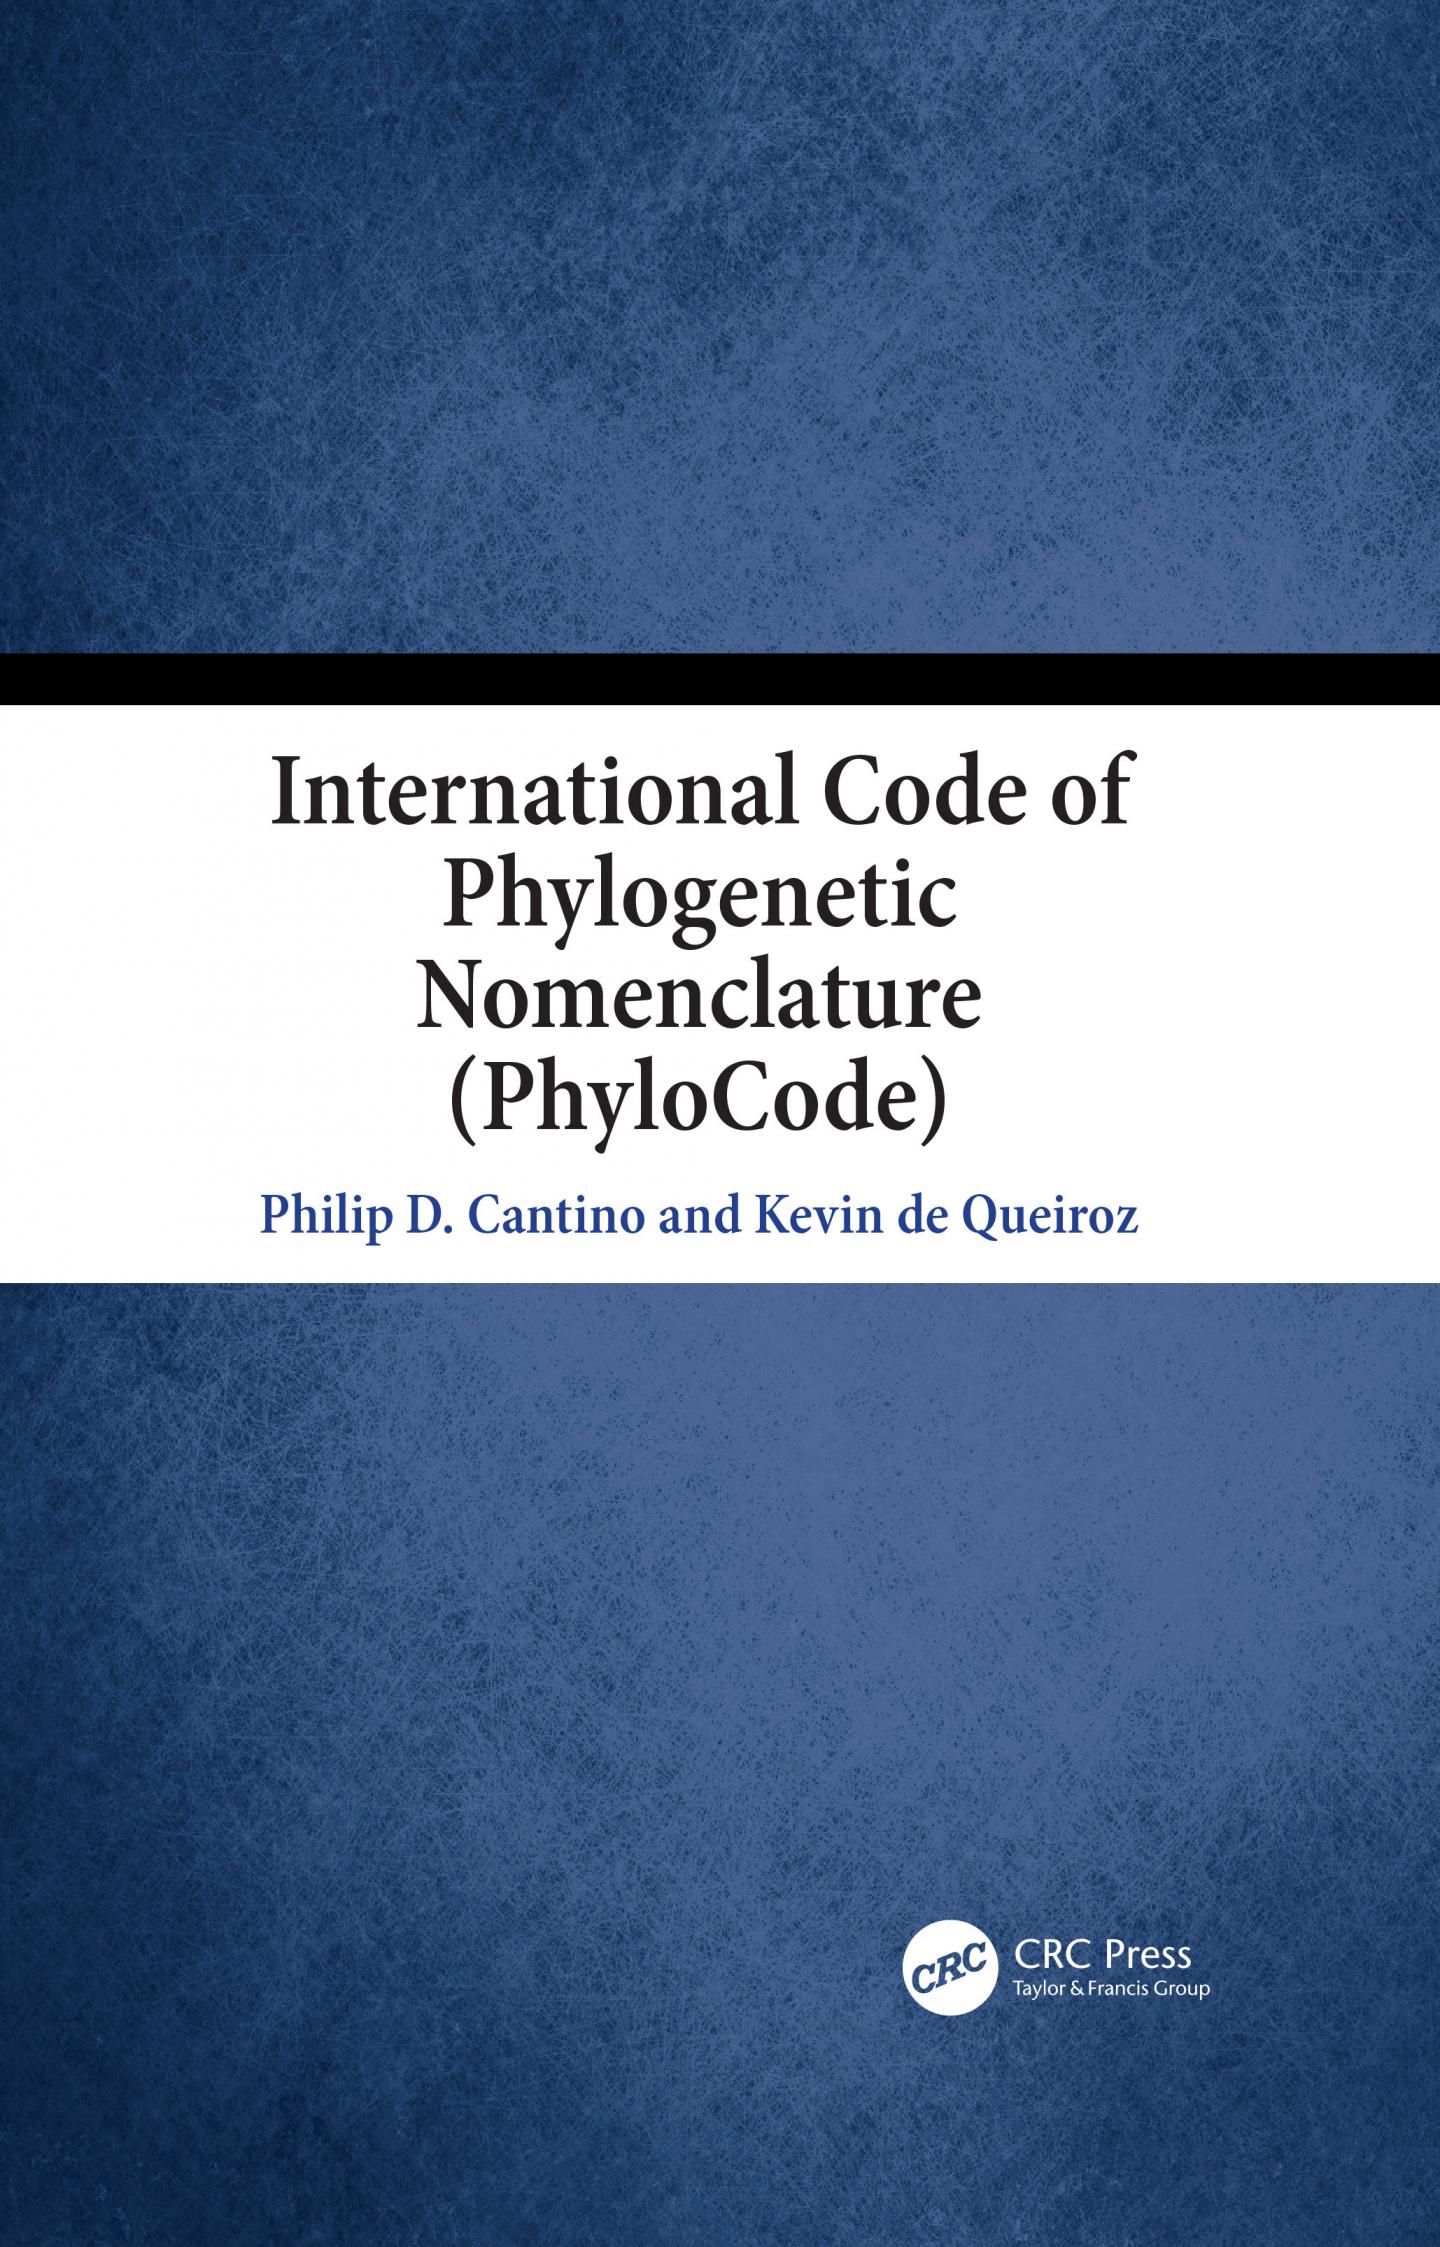 PhyloCode Is Evolution-Based Naming System for Life